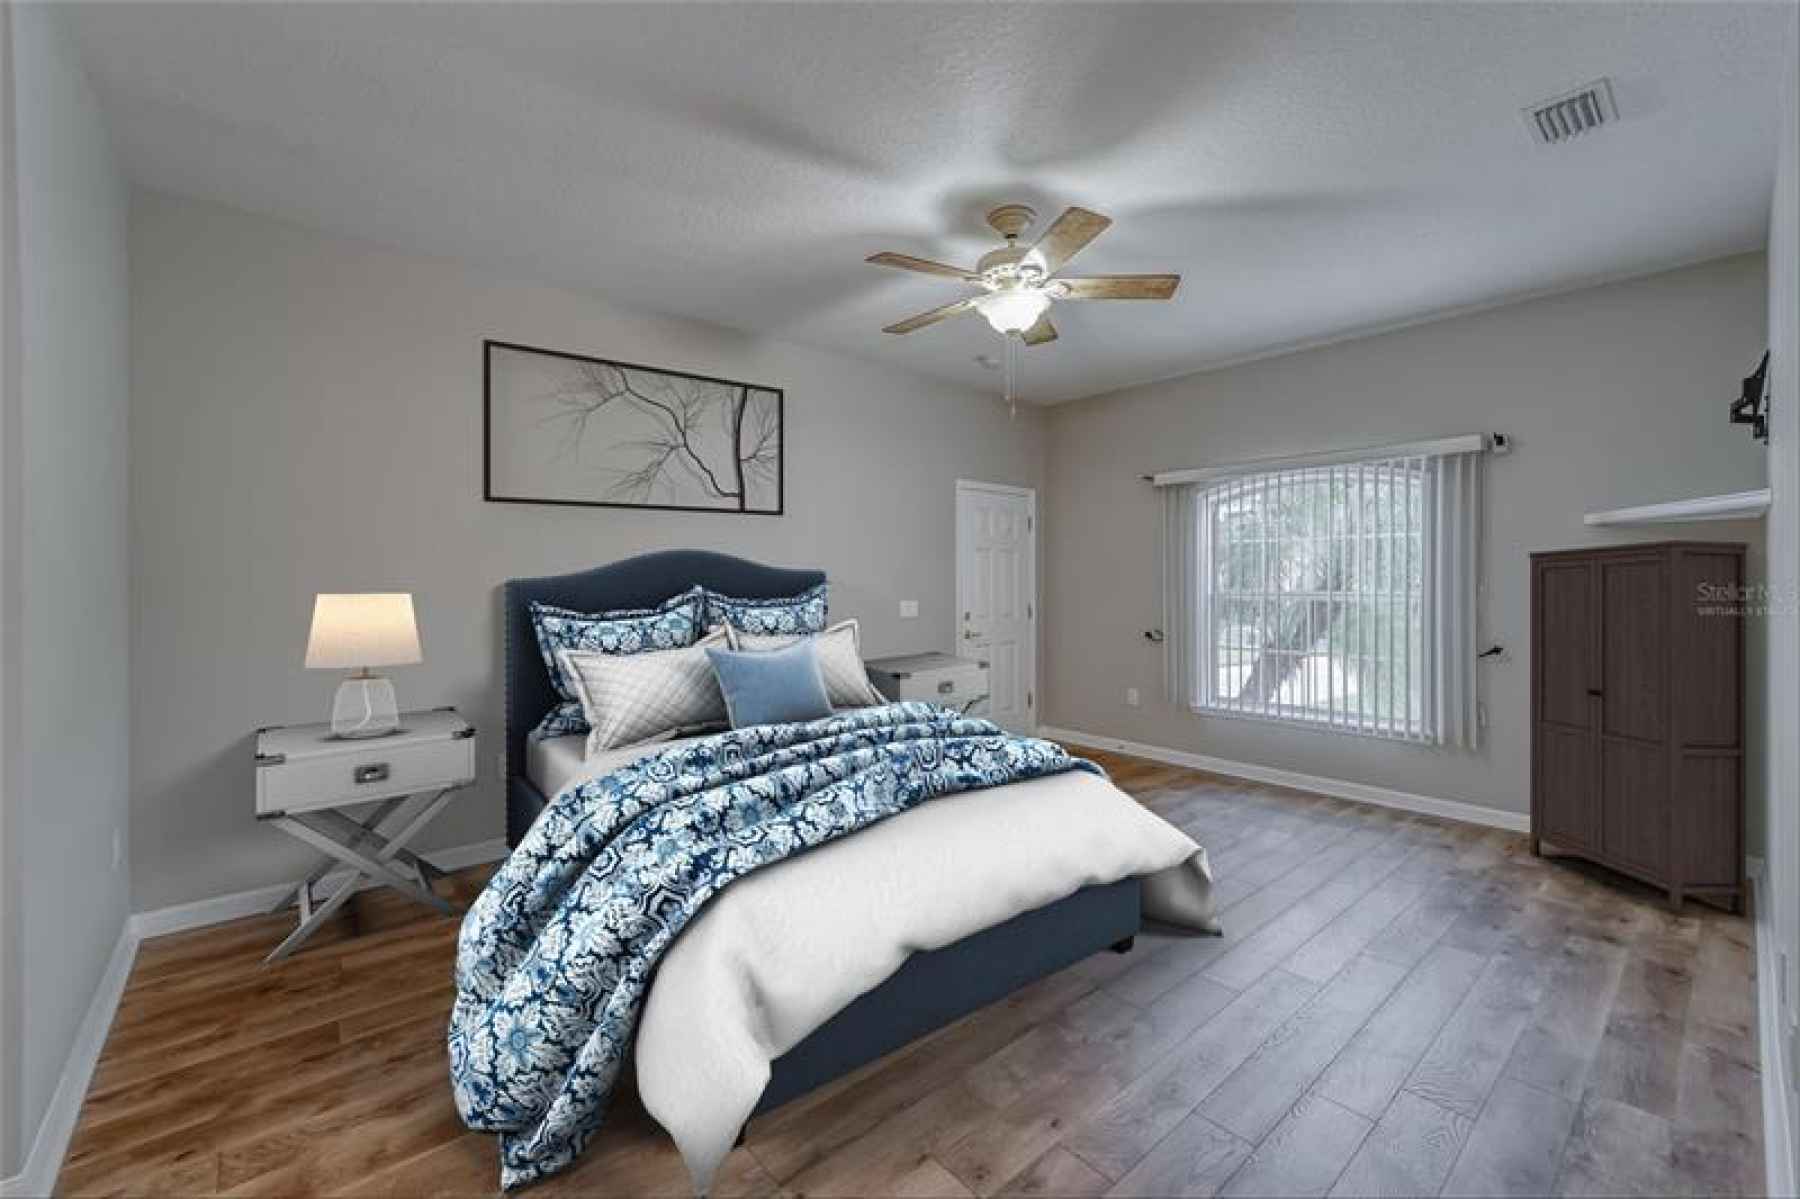 IN-LAW MASTER BEDROOM - VIRTUALLY STAGED